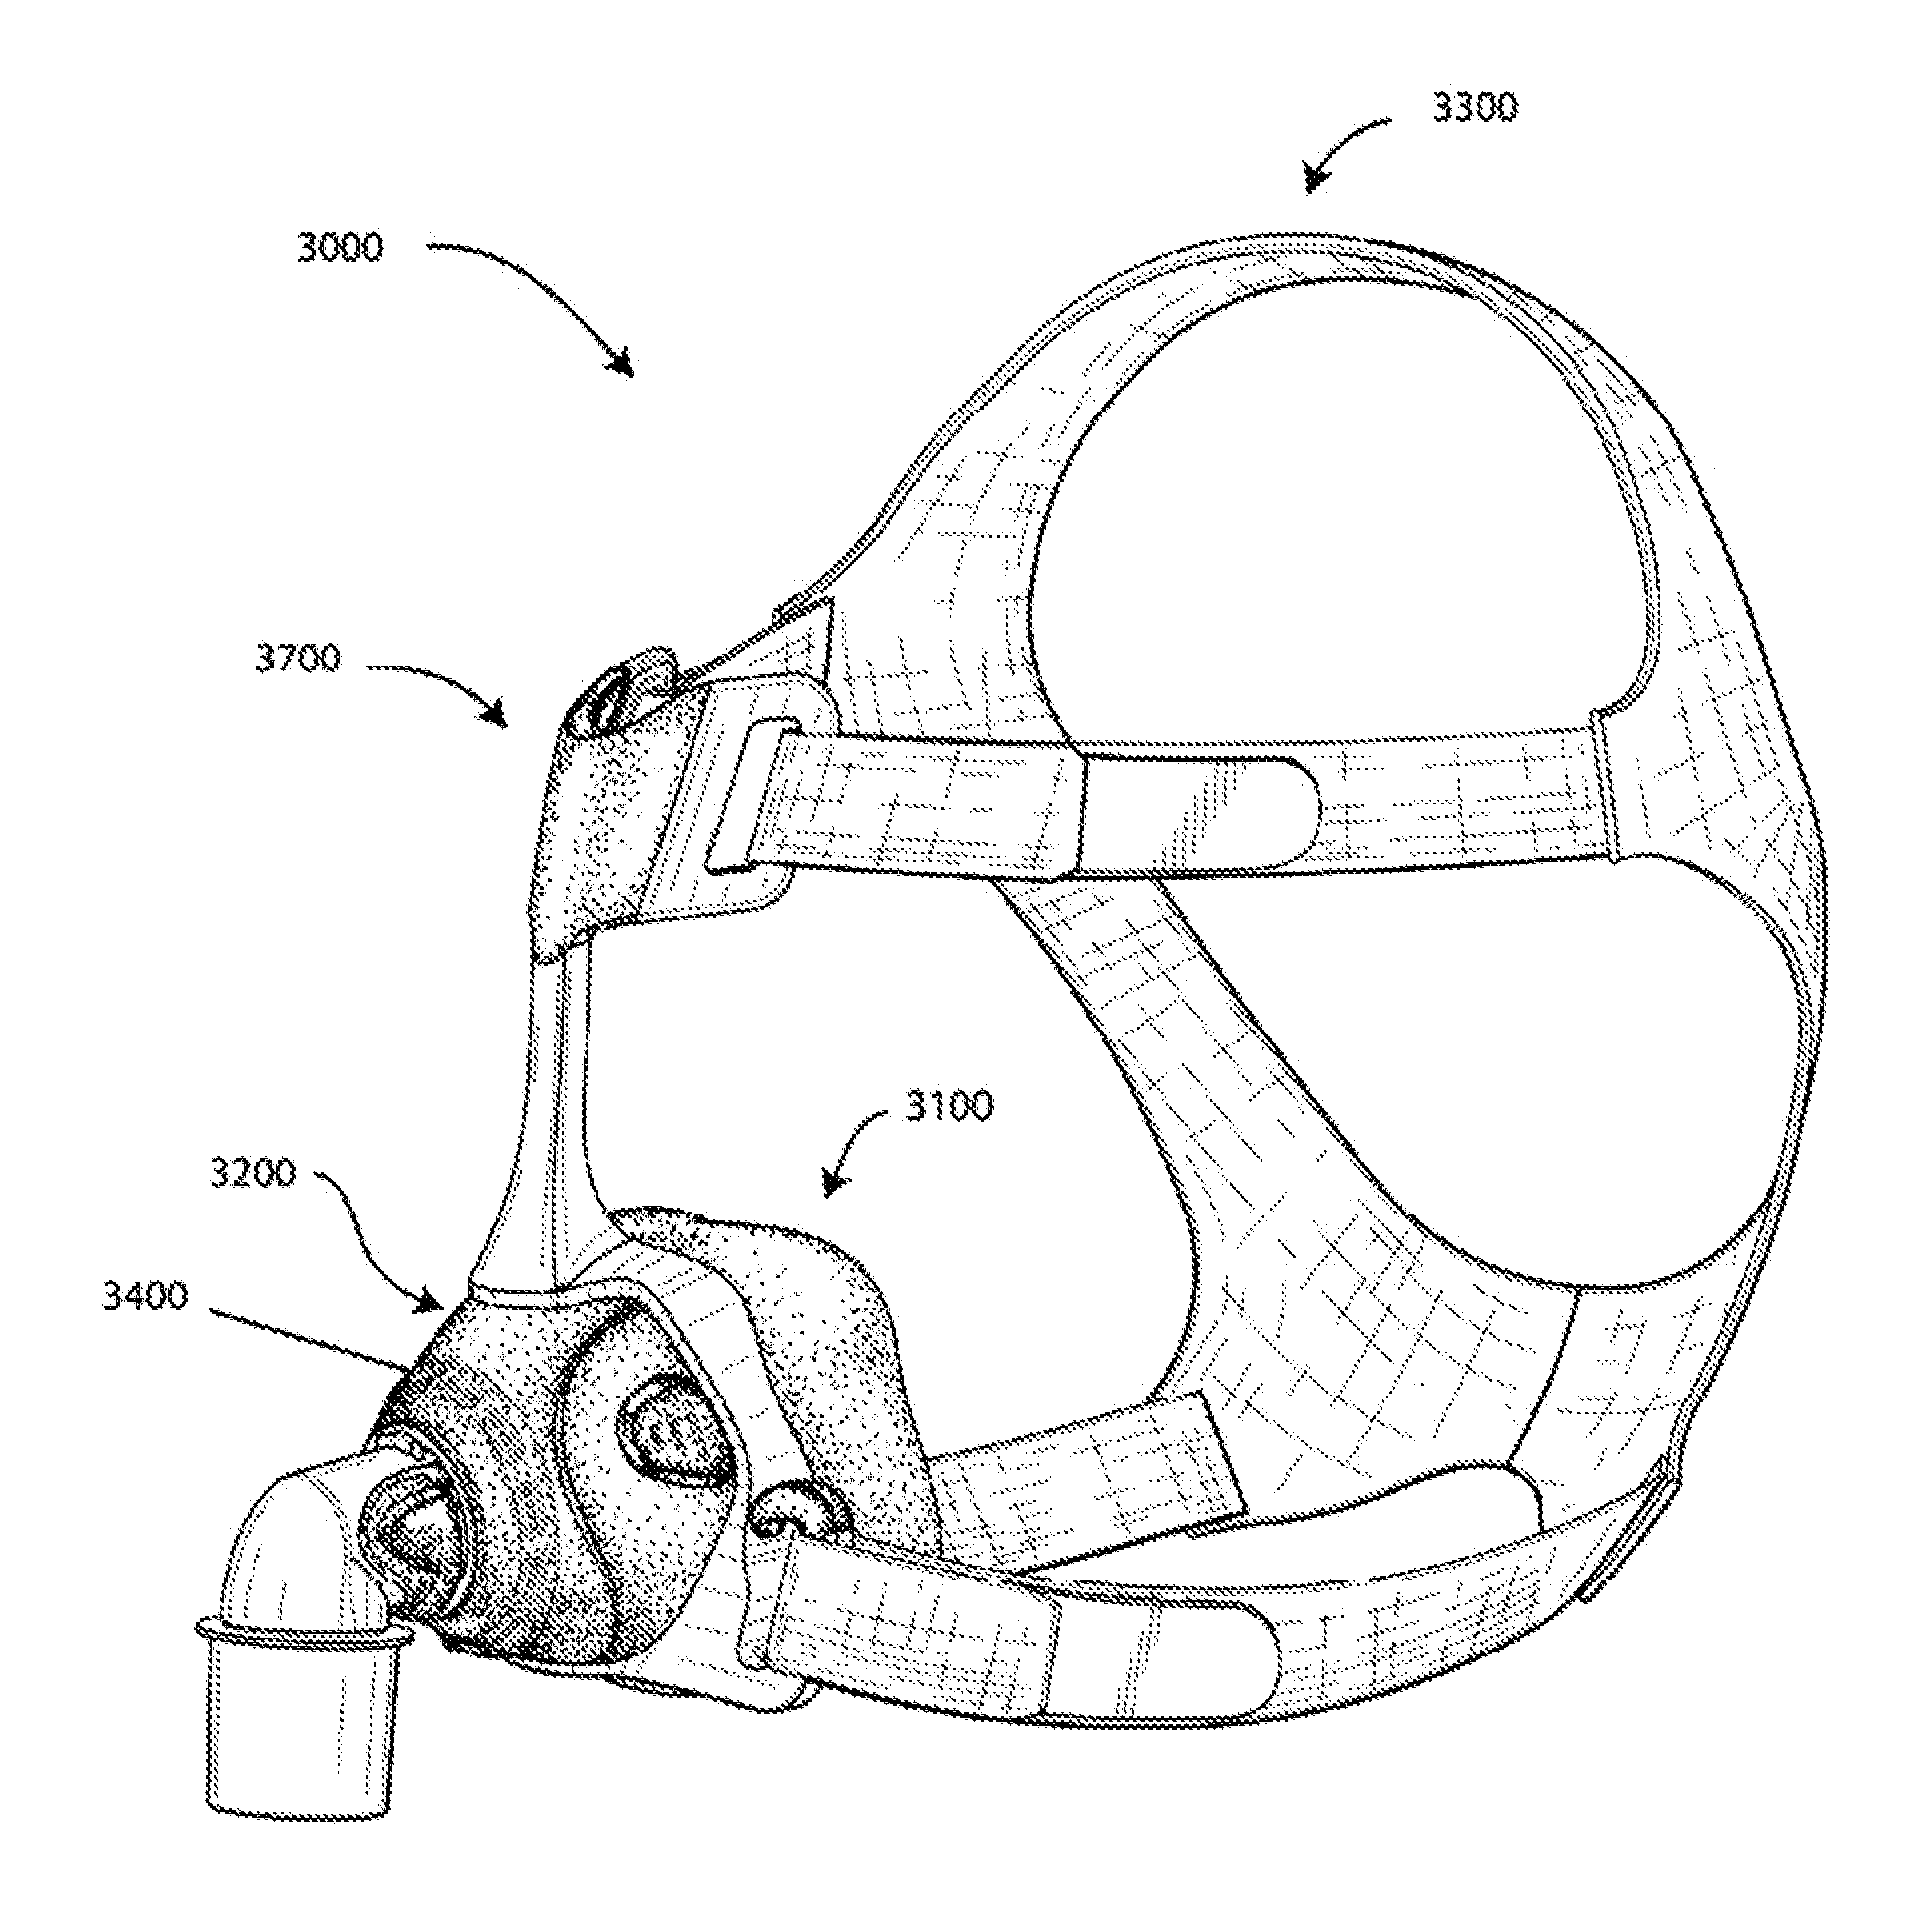 Vent device for use with a respiratory device